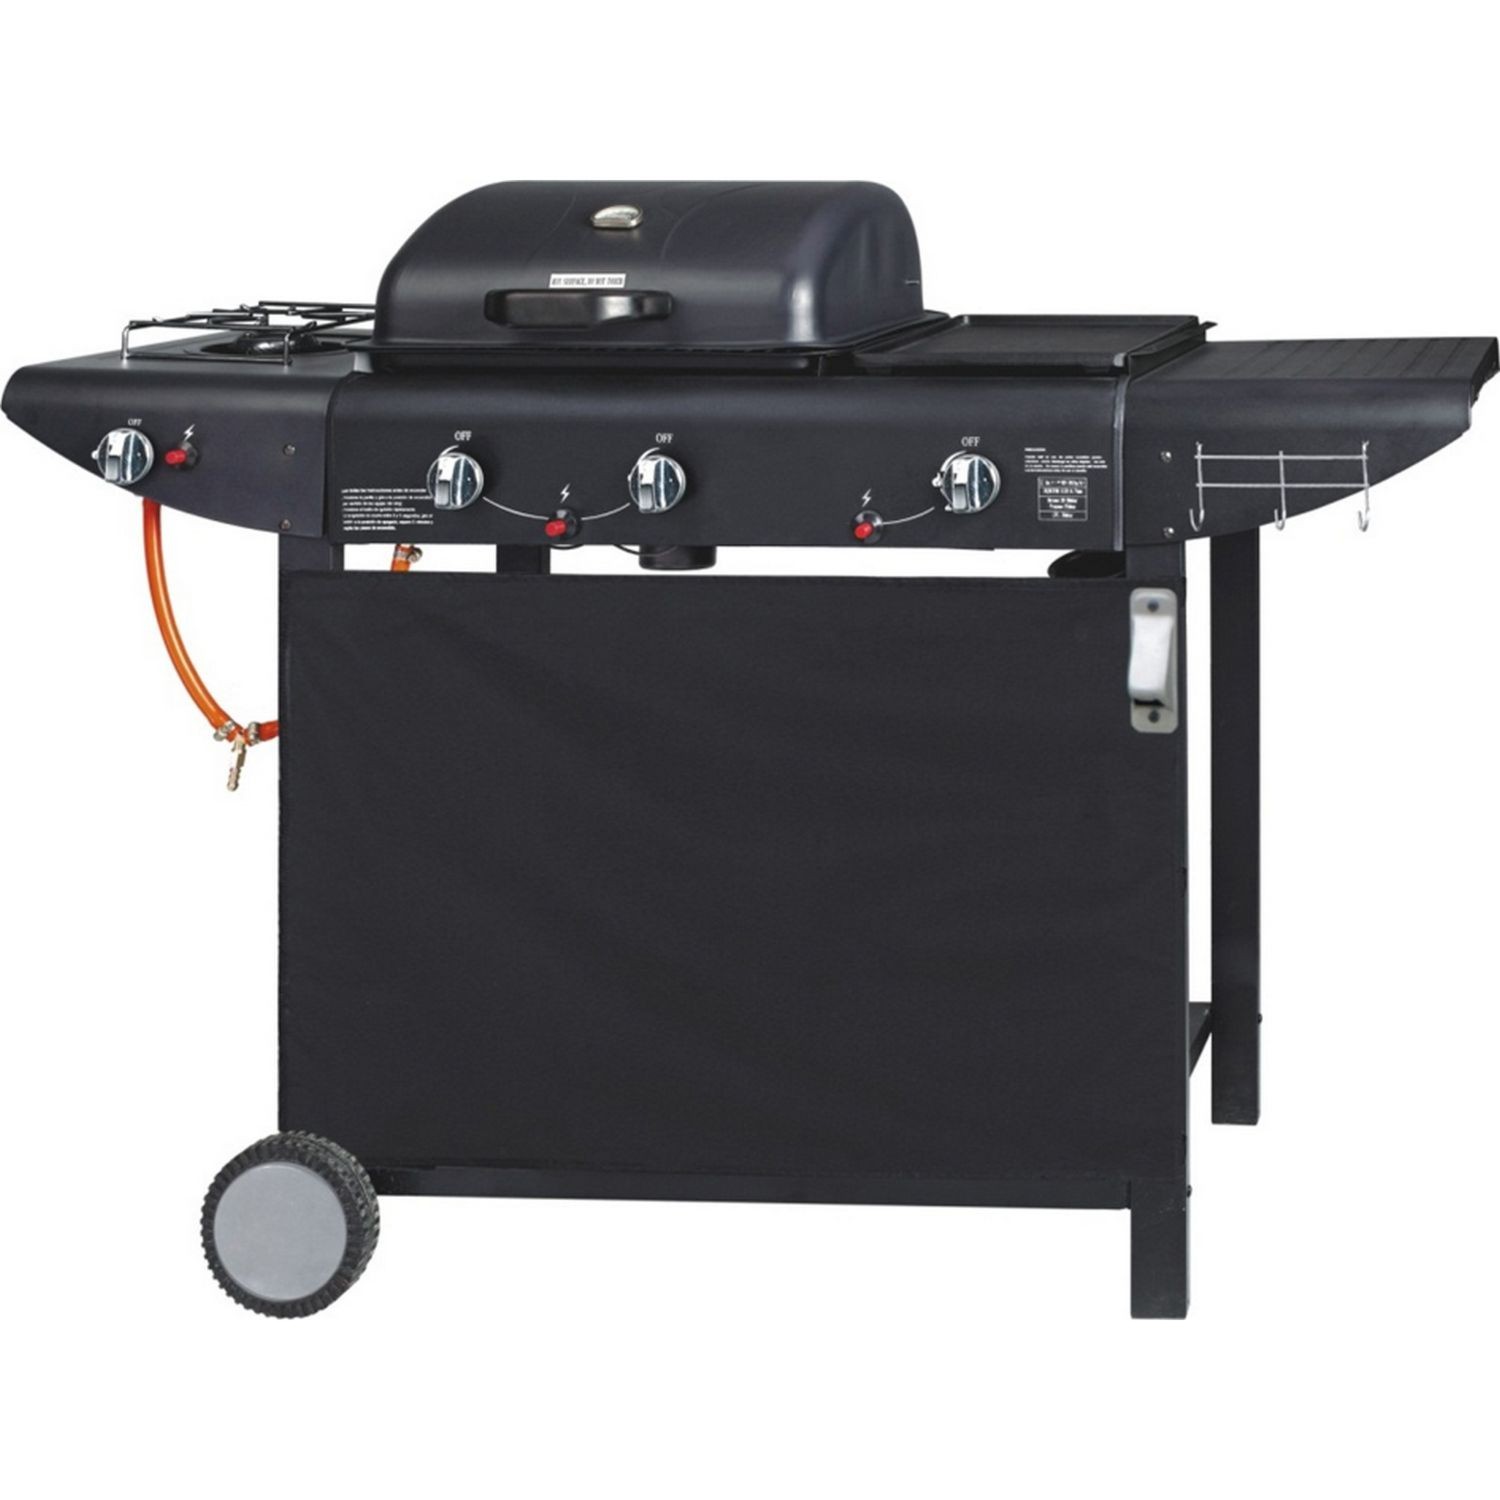 Hobart Two Burner Grill With Two Side Burners - Black Image 1